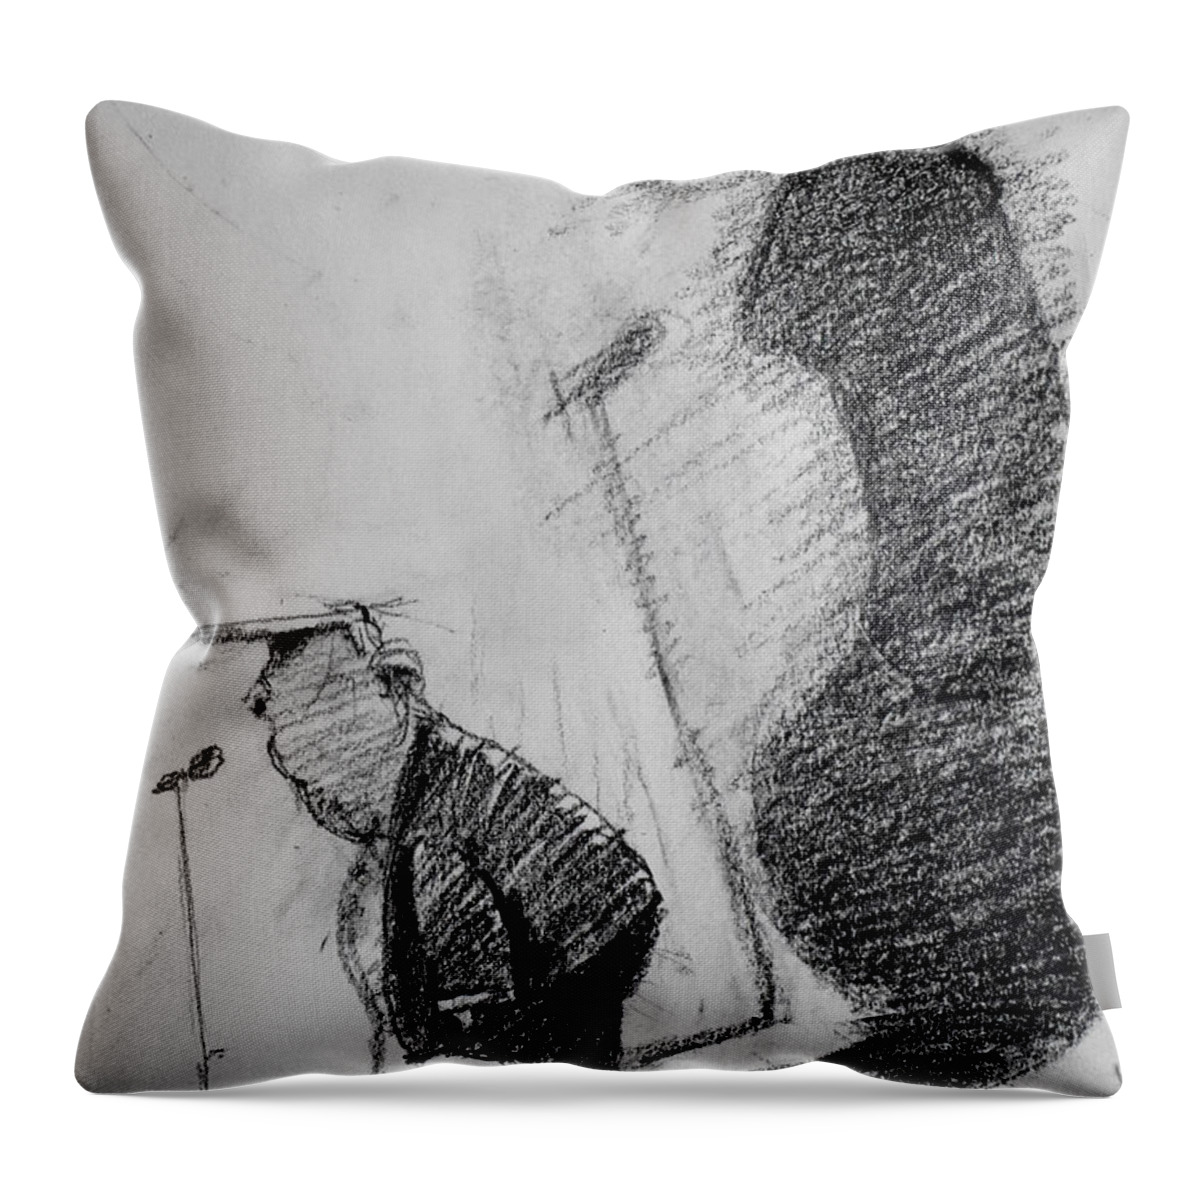 Donald Throw Pillow featuring the painting Trump by Ylli Haruni